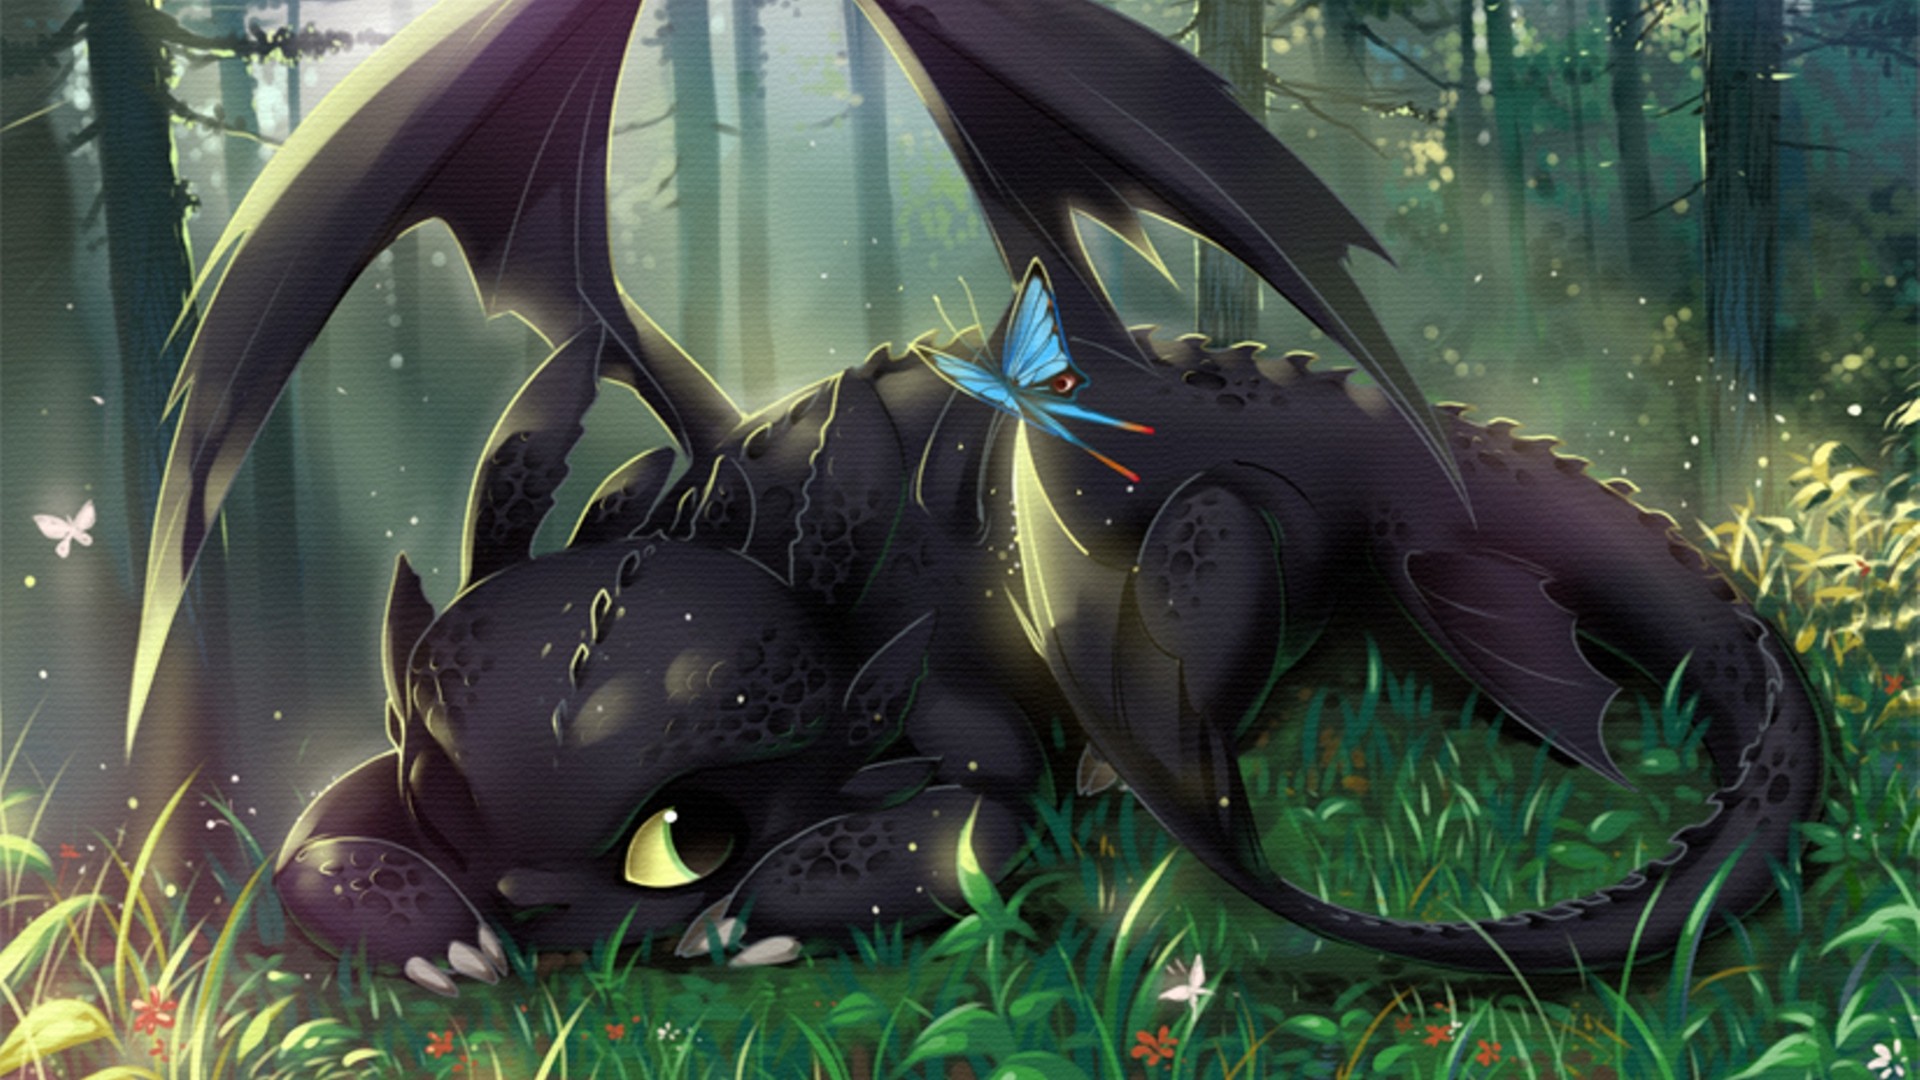 How To Train Your Dragon, Toothless Wallpapers HD / Desktop and Mobile